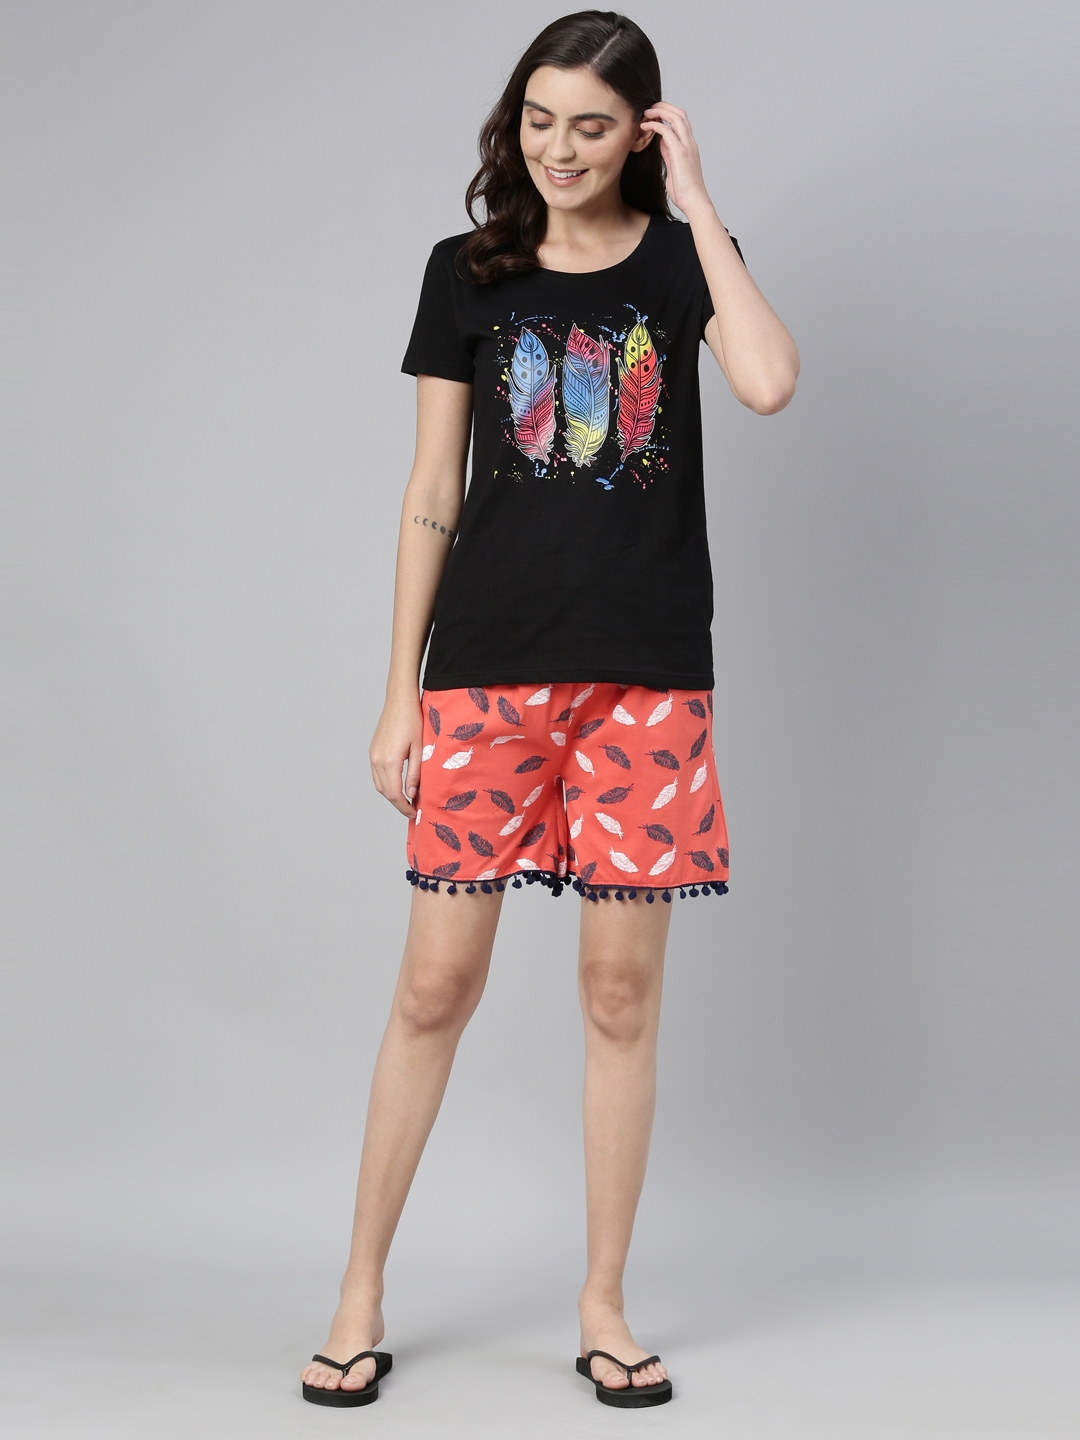 Kryptic | Kryptic Women's 100% Cotton Printed Shorts - Pack of 2 5